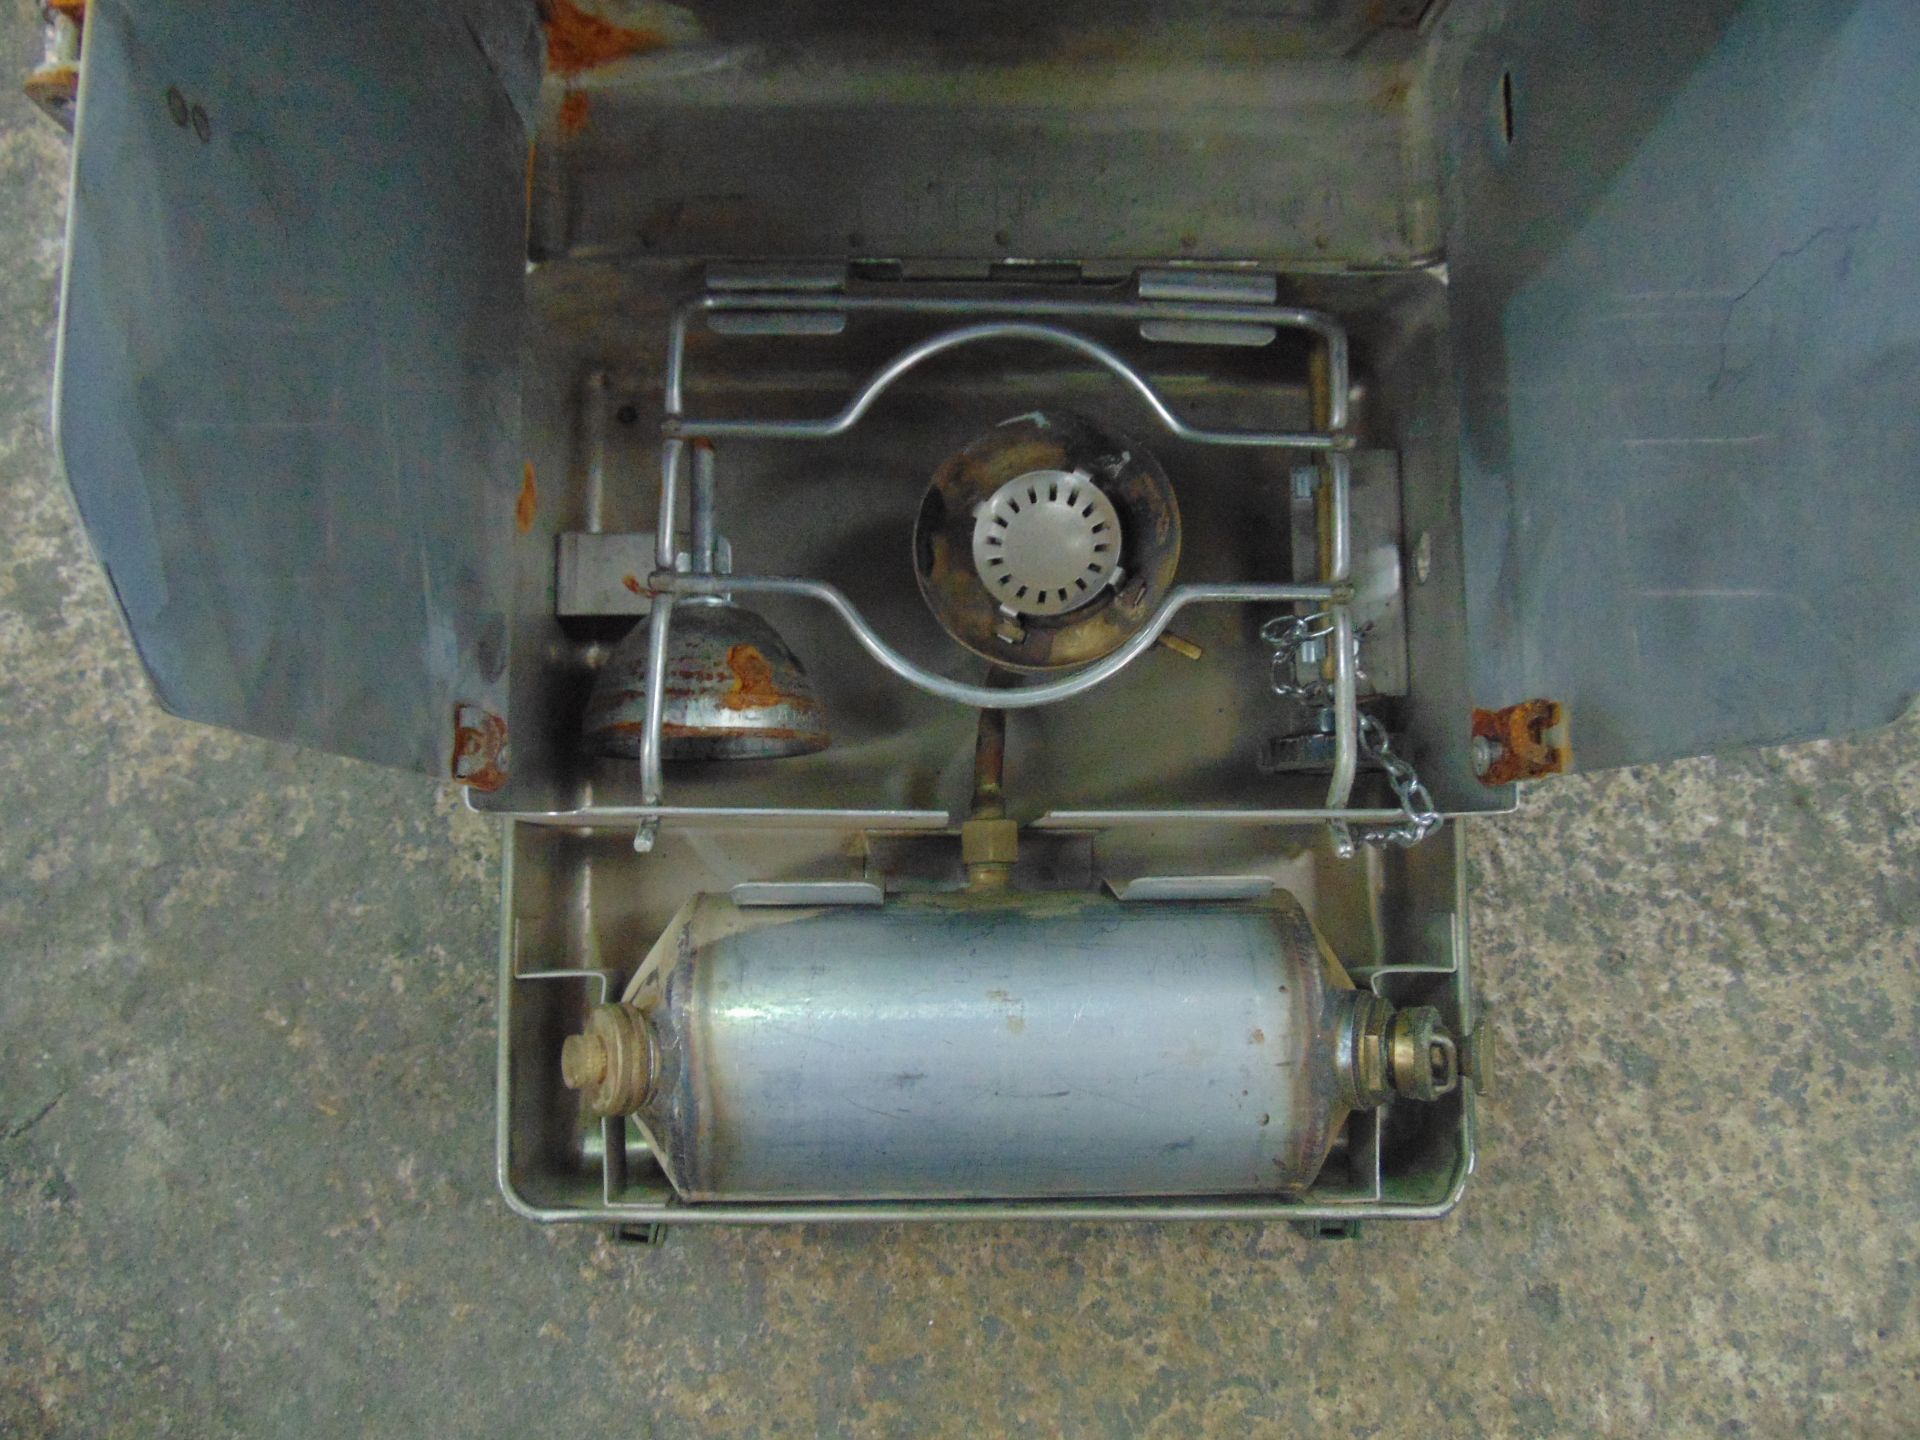 No. 12 Stove, Diesel Cooker/Camping Stove - Image 3 of 5